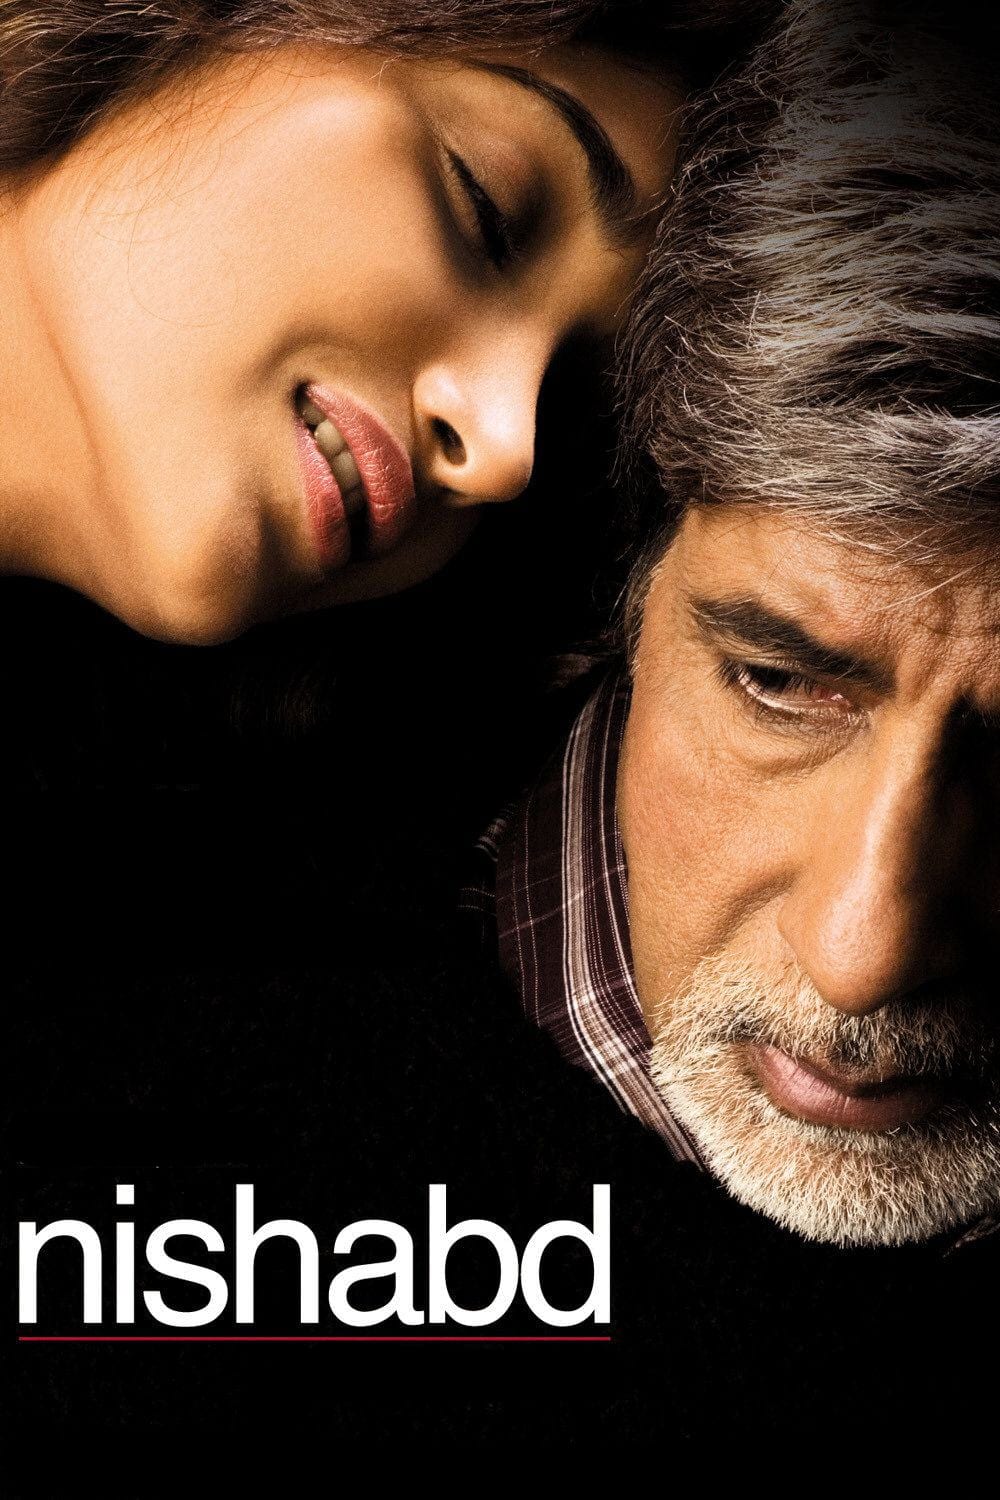 Poster for the movie "Nishabd"